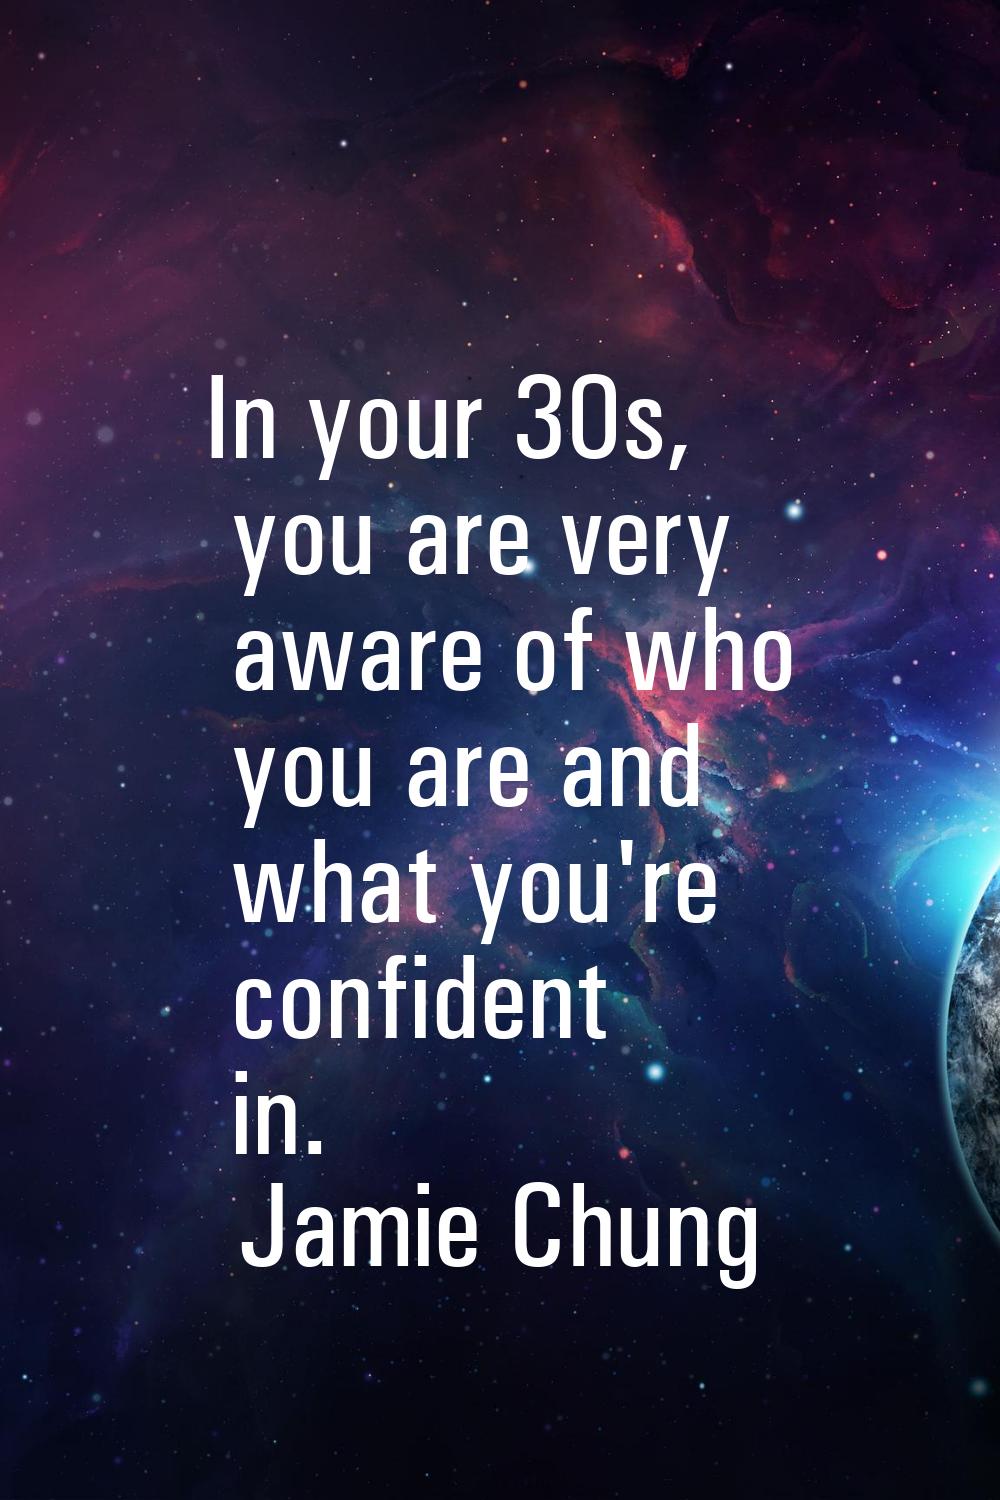 In your 30s, you are very aware of who you are and what you're confident in.